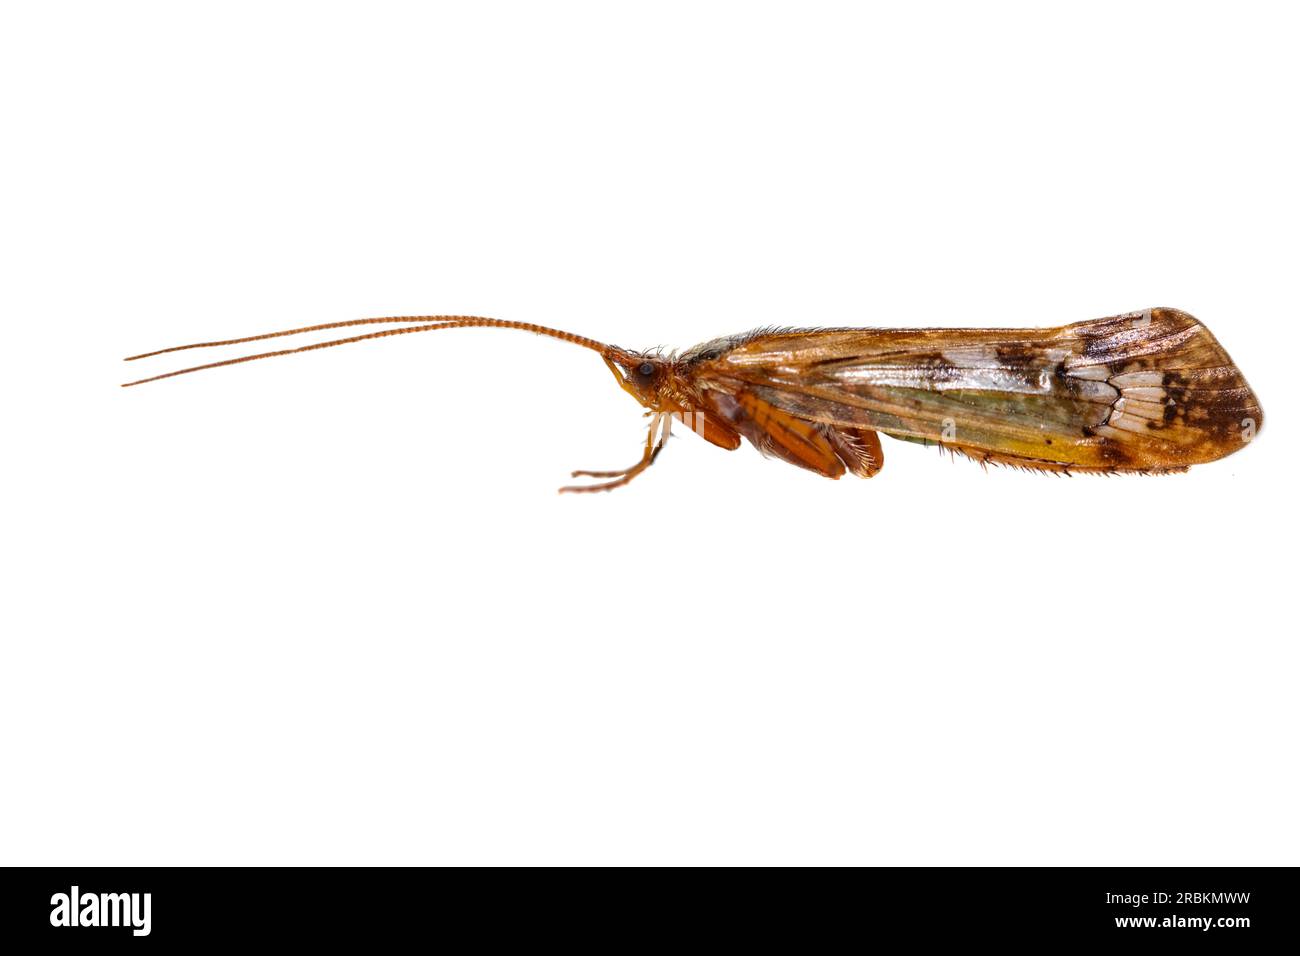 Moon caddisfly (Limnephilus lunatus), side view, cut out, Netherlands Stock Photo